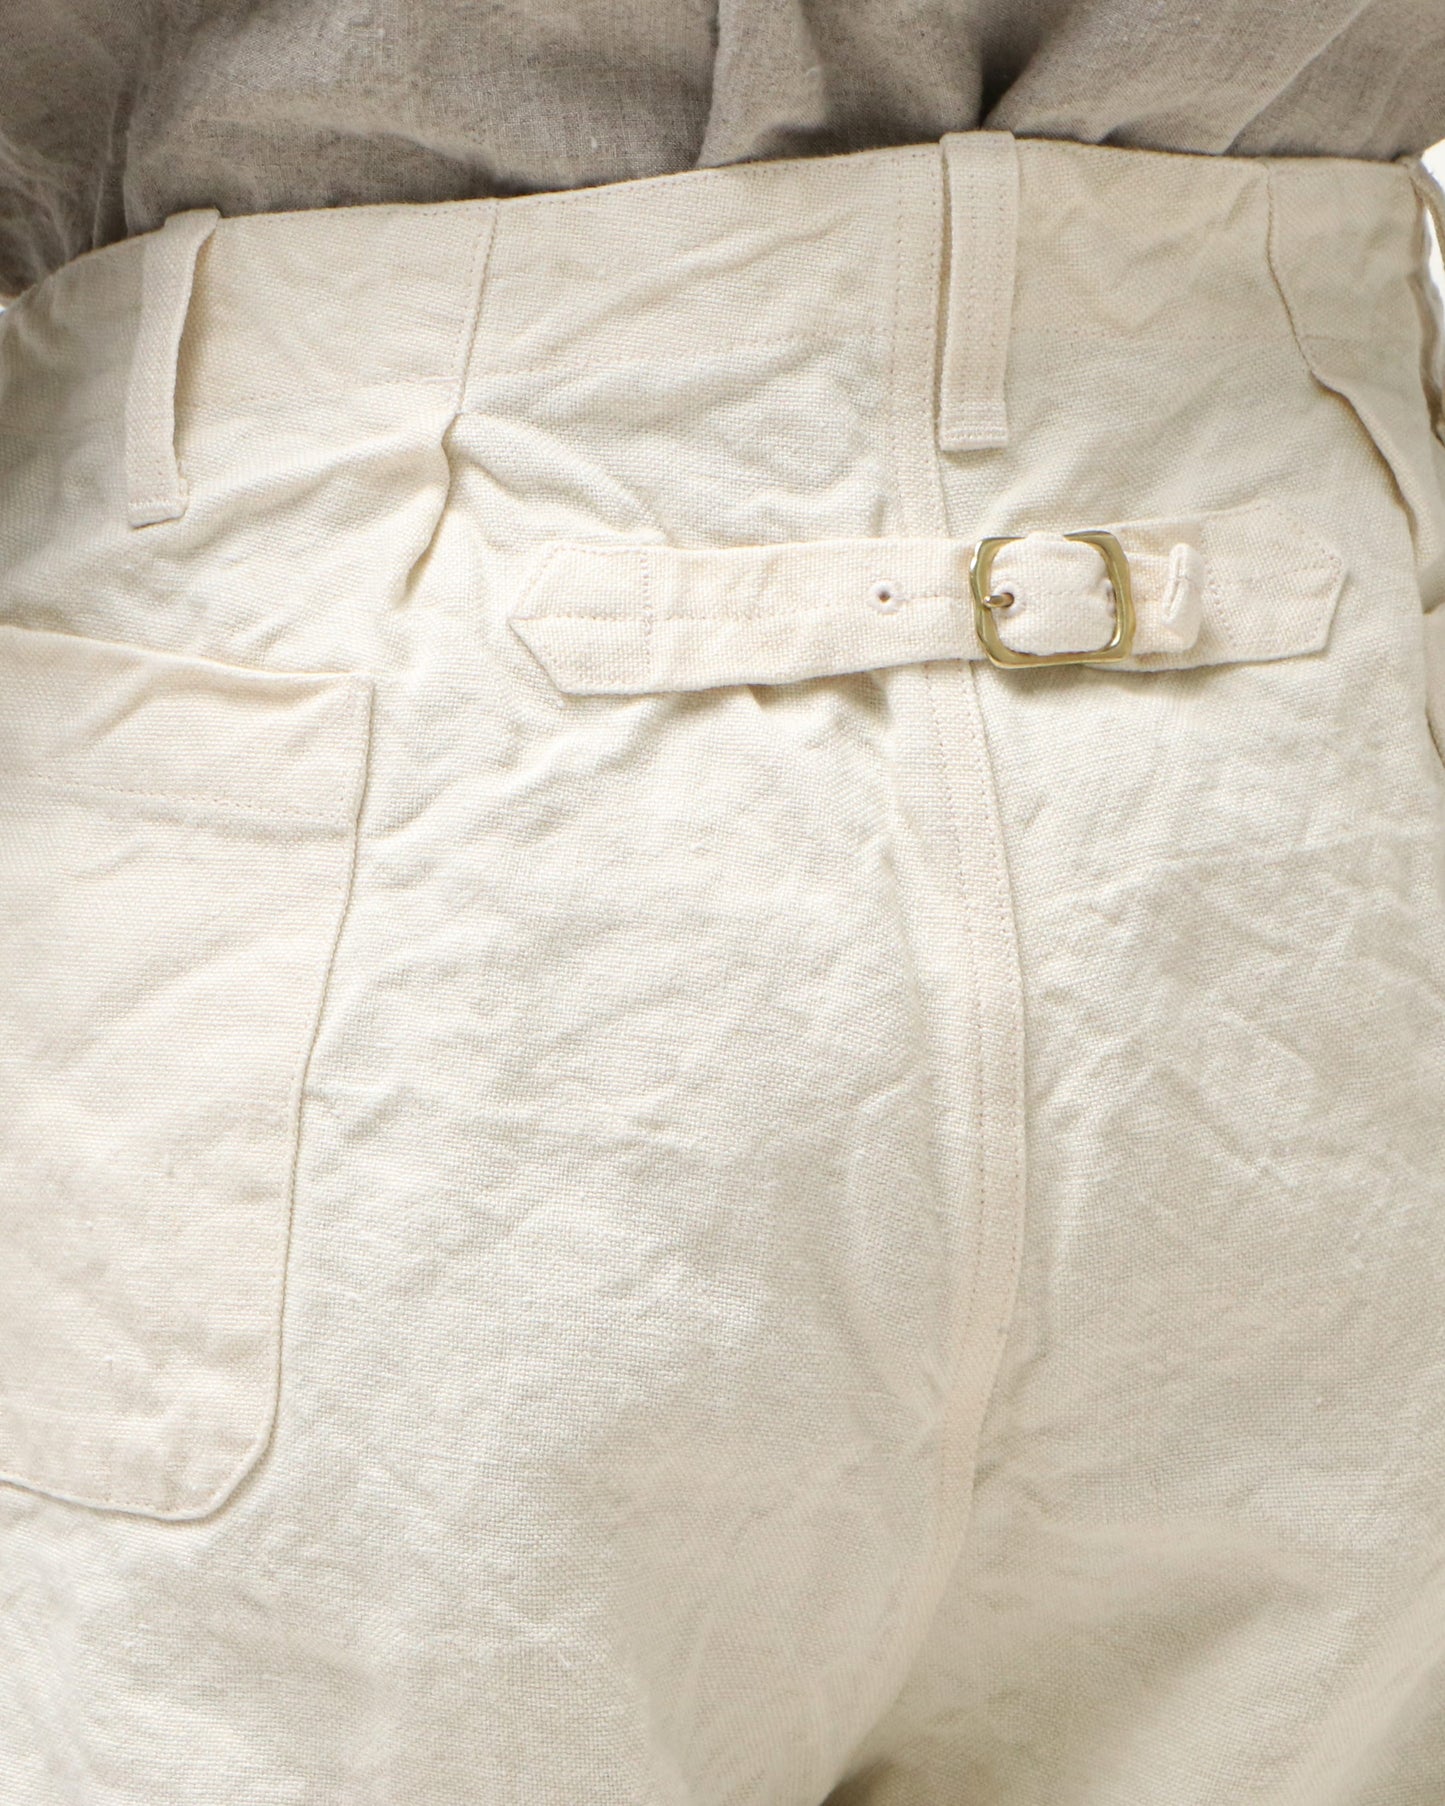 Linen work trousers OW